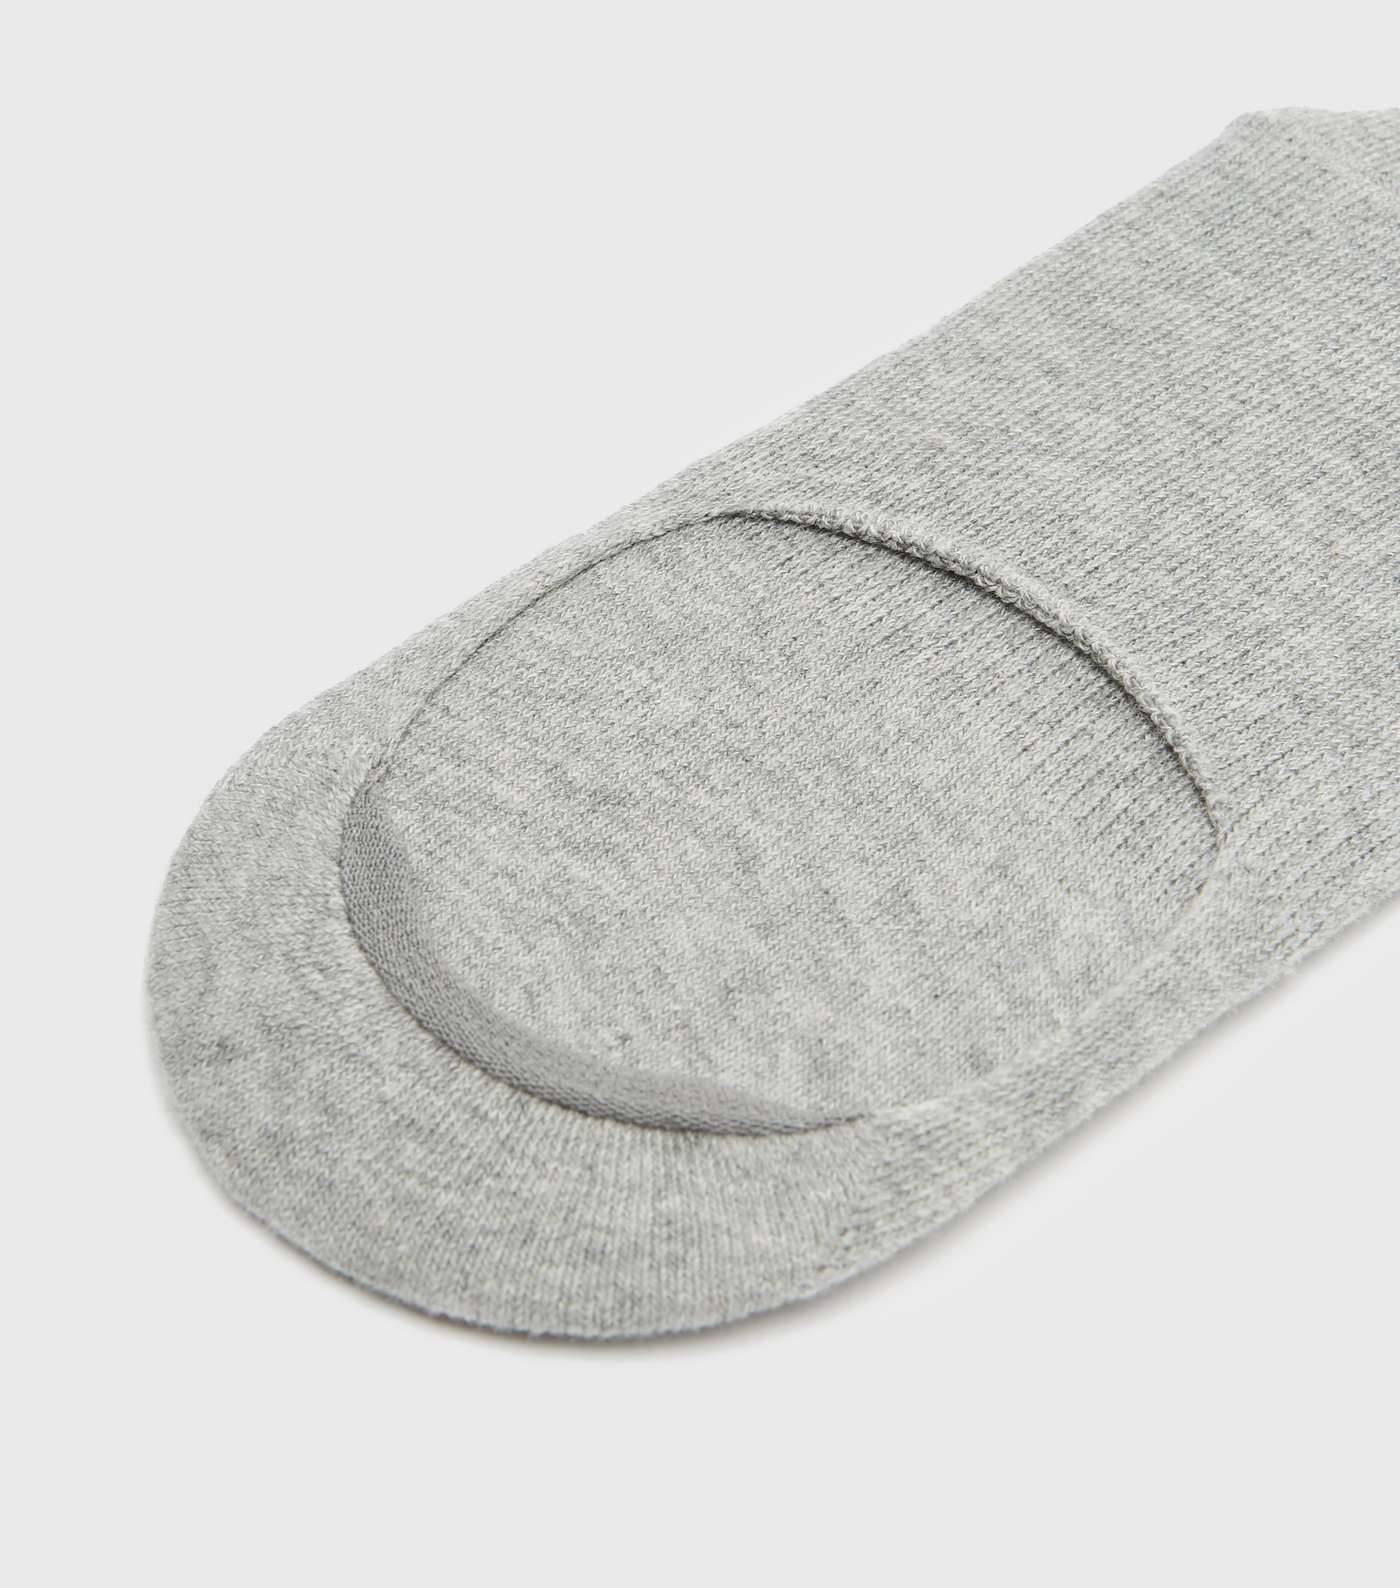 3 Pack Grey Sports Grip Invisible Socks Image 2